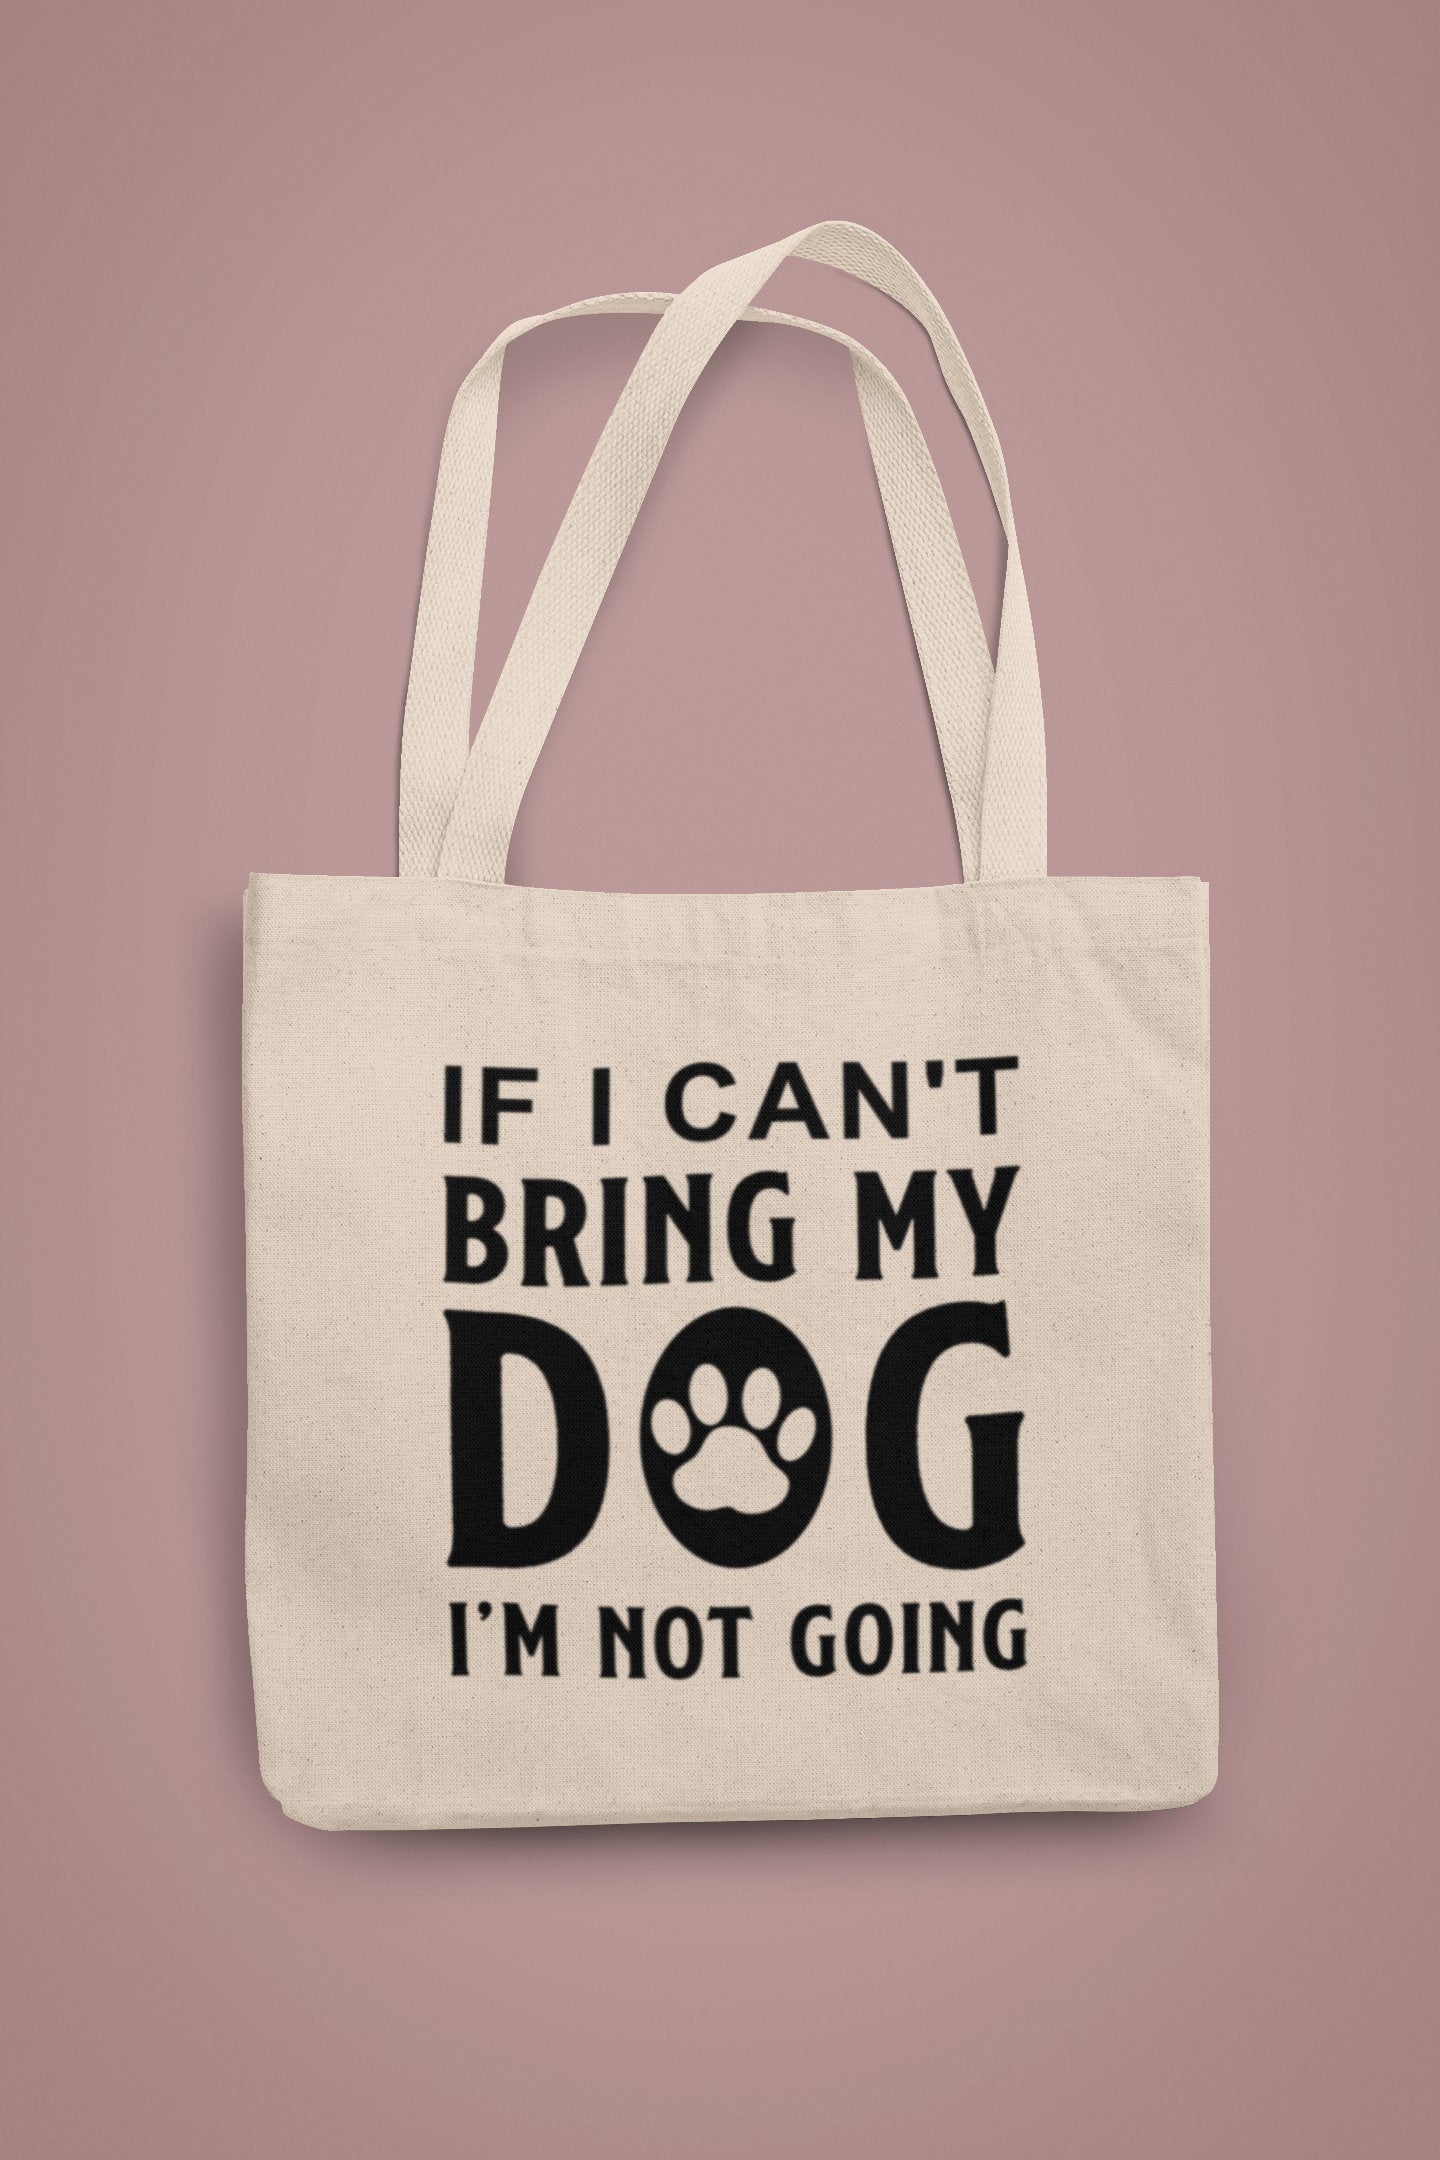 If I Can't Bring My Dog Tote